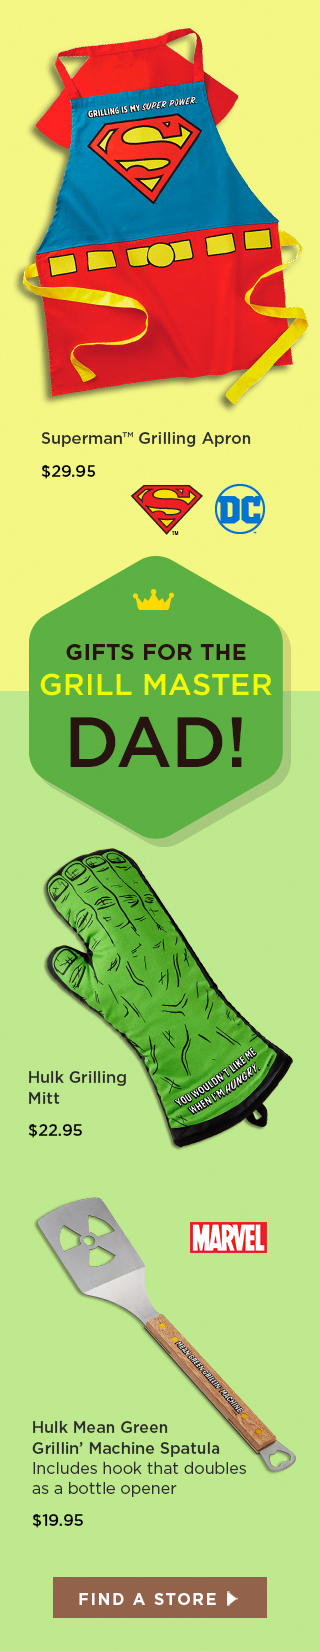 Gifts for the Grill Master Dad!